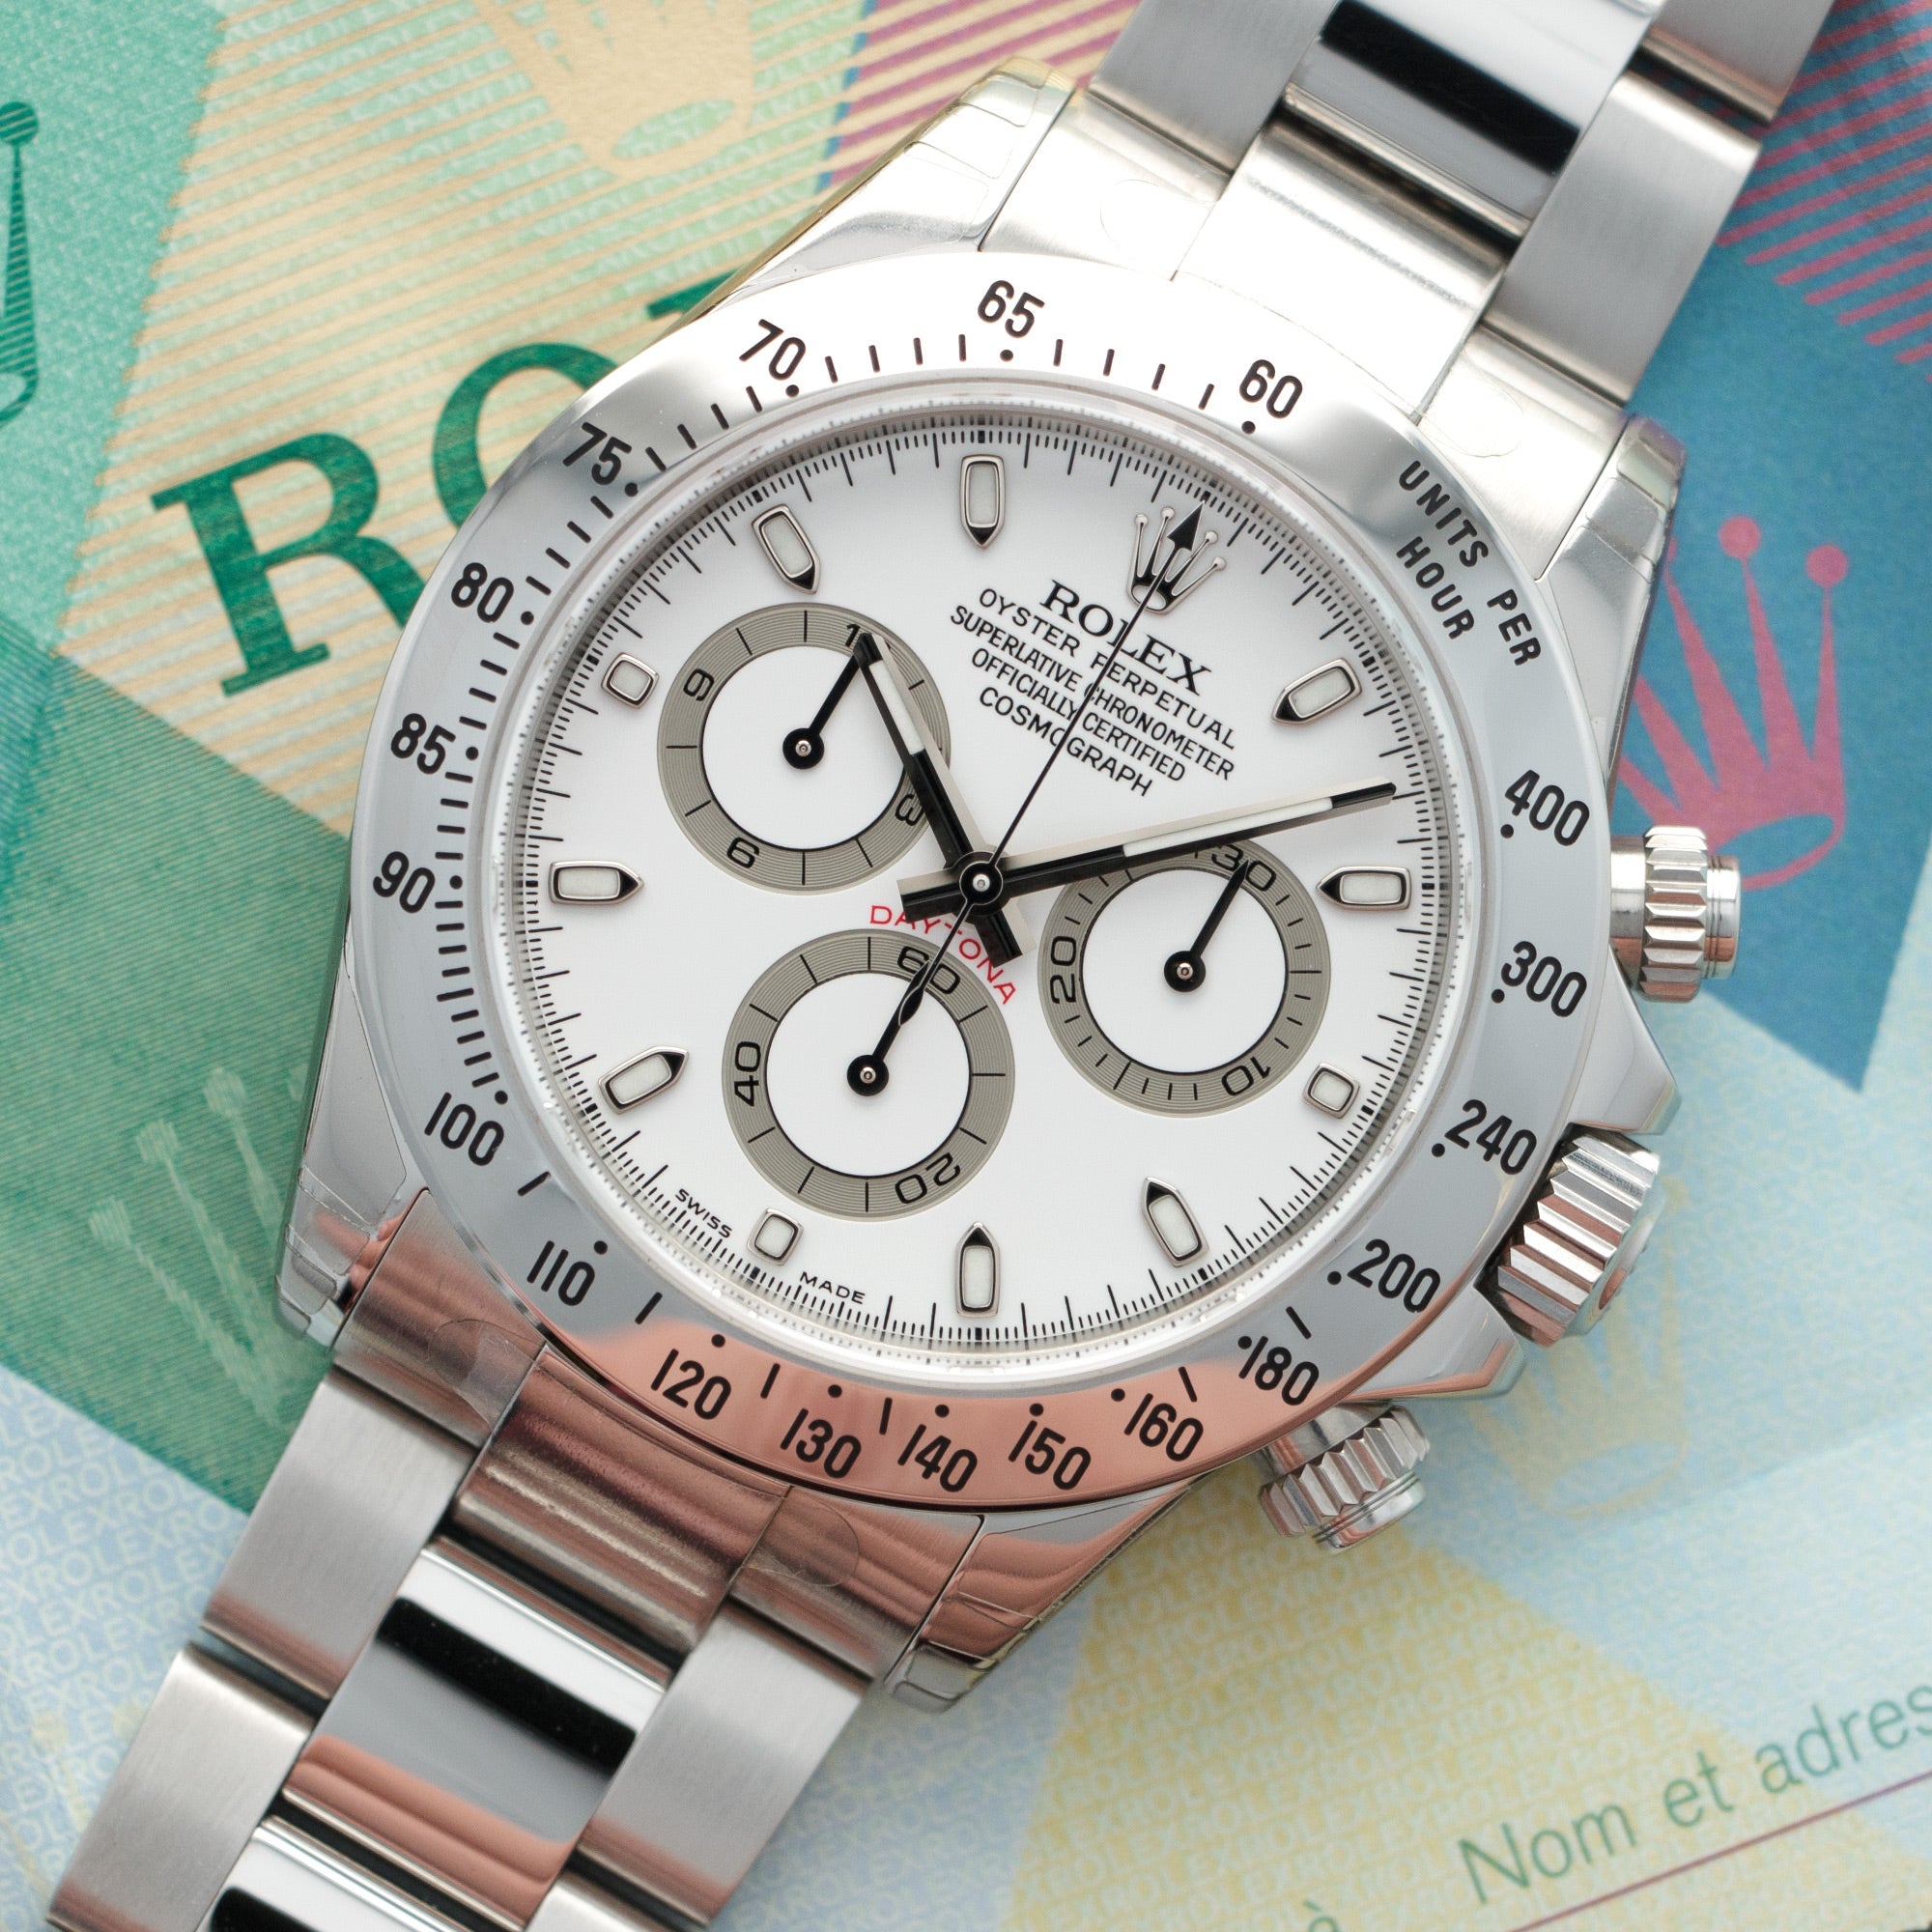 Rolex - Rolex Cosmograph Daytona Watch Ref. 116520, with Original Box and Papers, Completely New Old Stock - The Keystone Watches